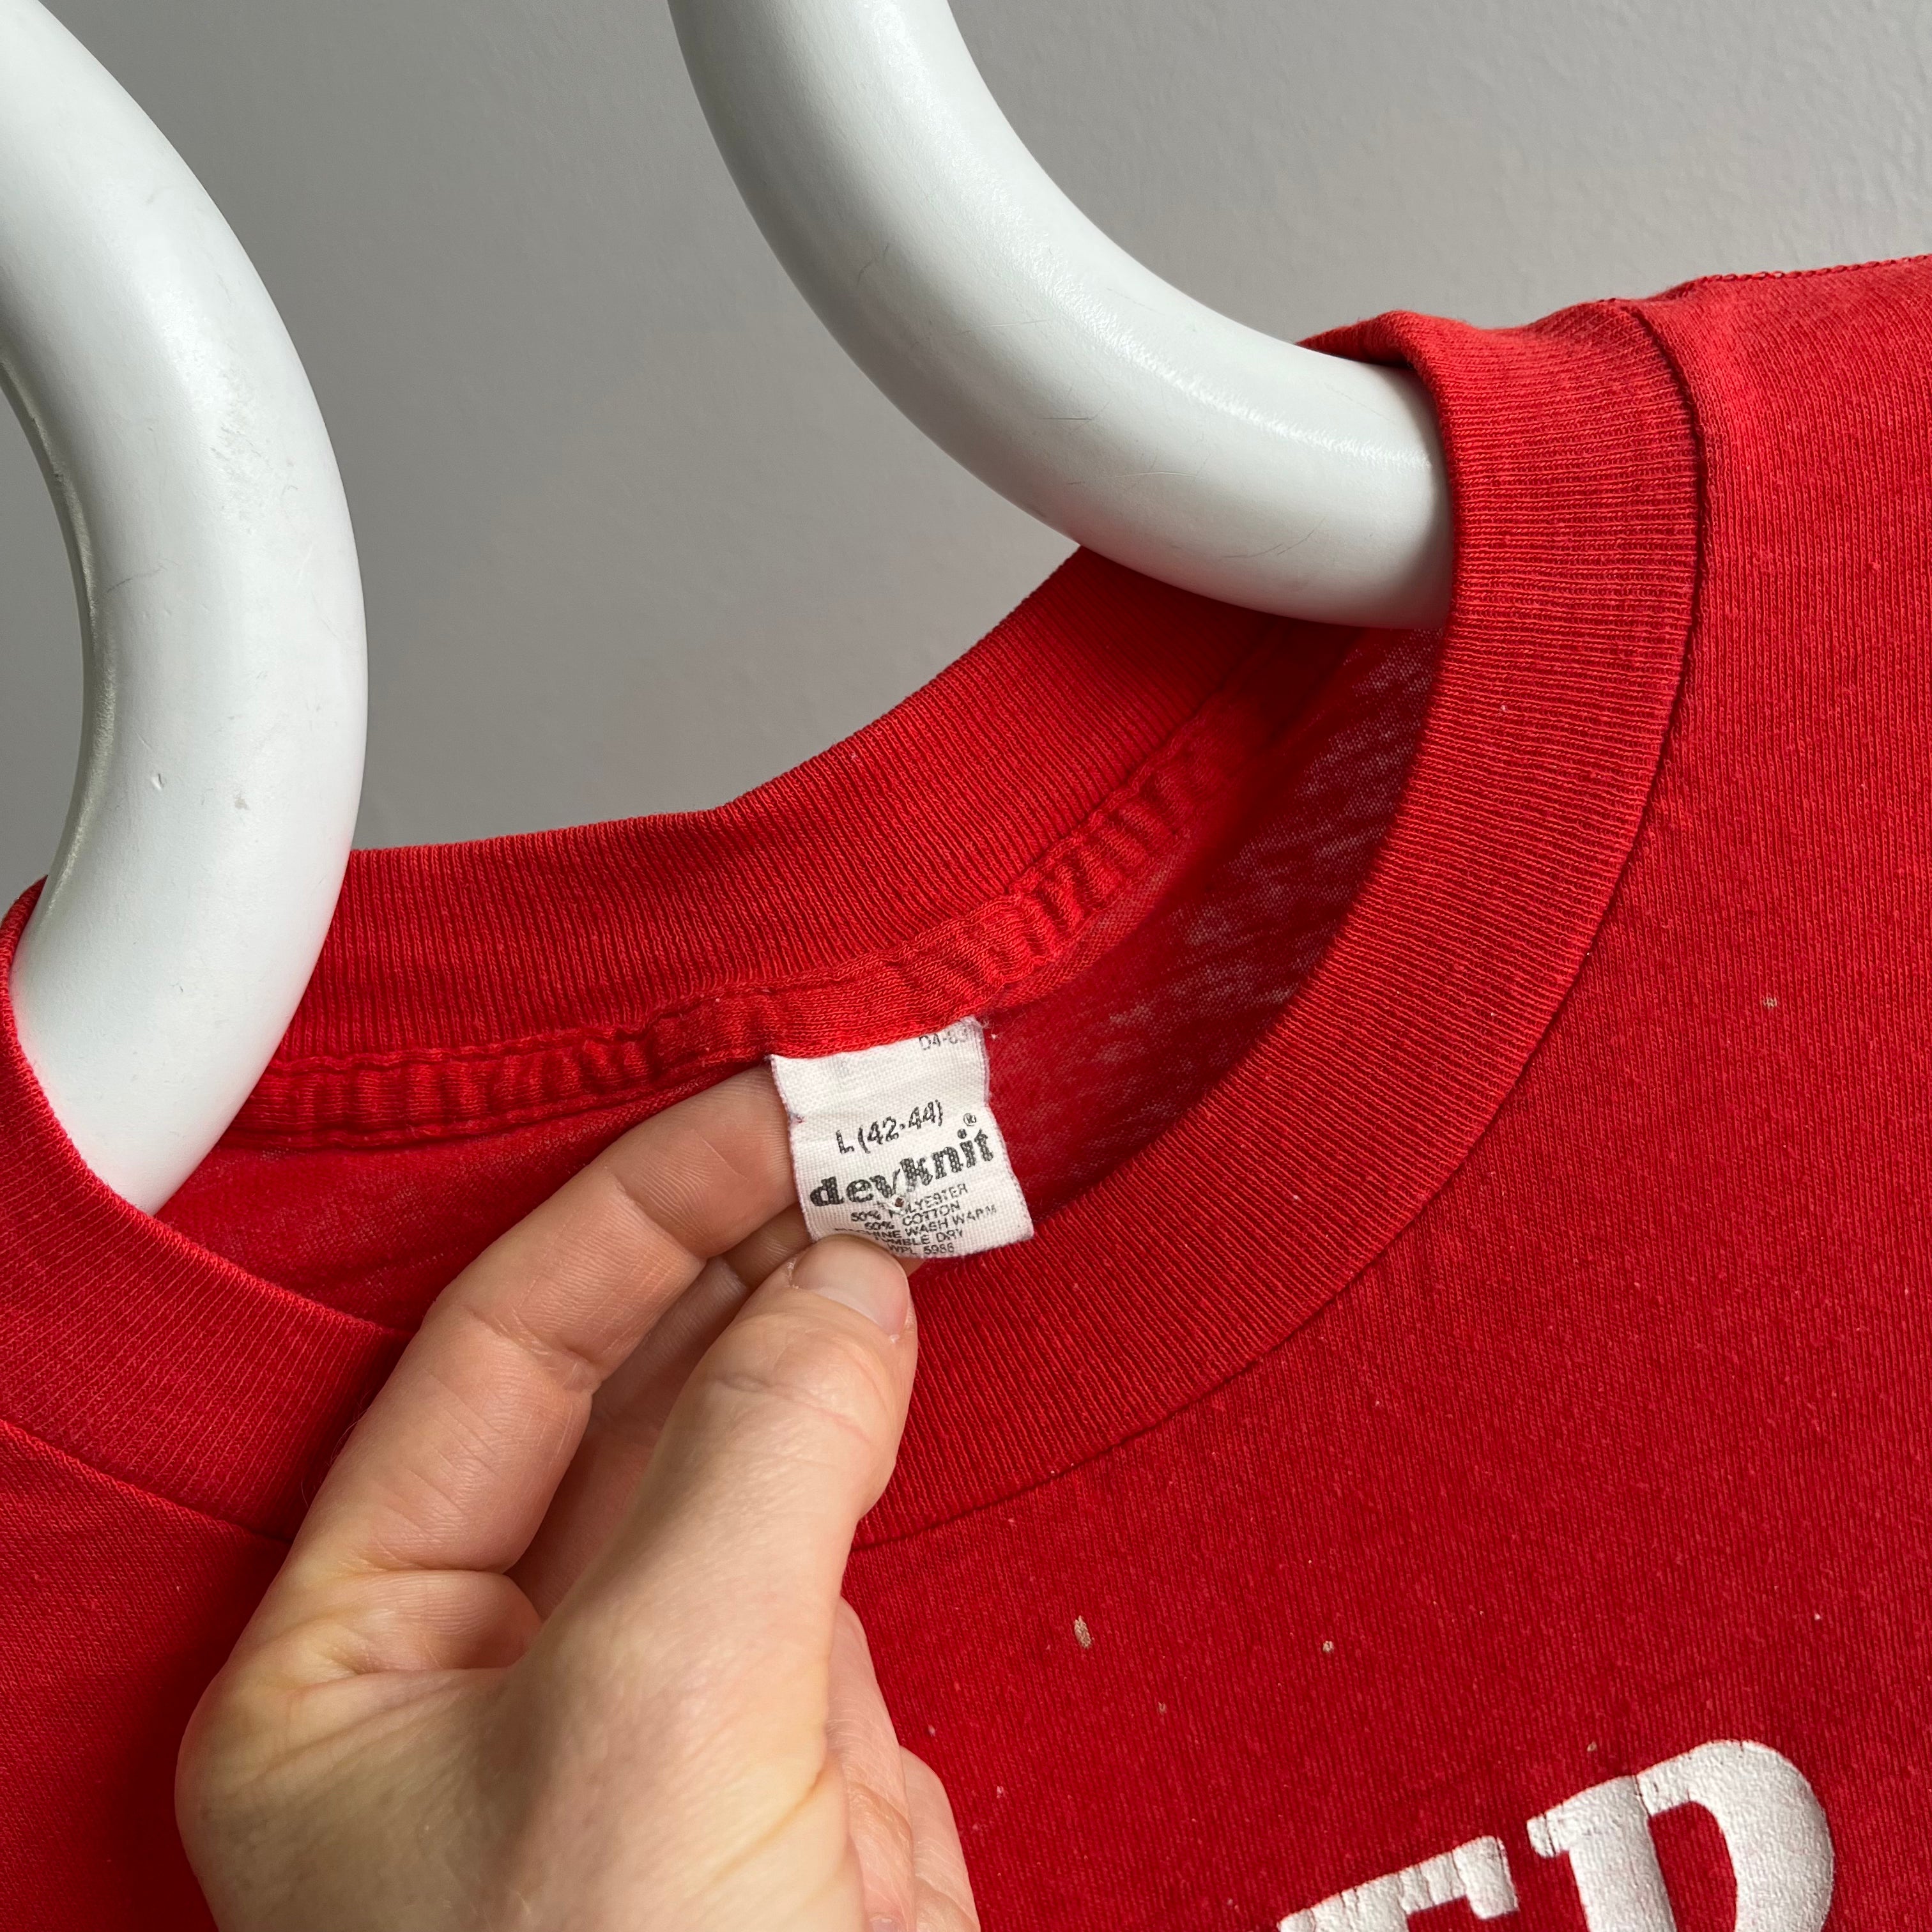 1970s United Savings Paint Stained T-Shirt